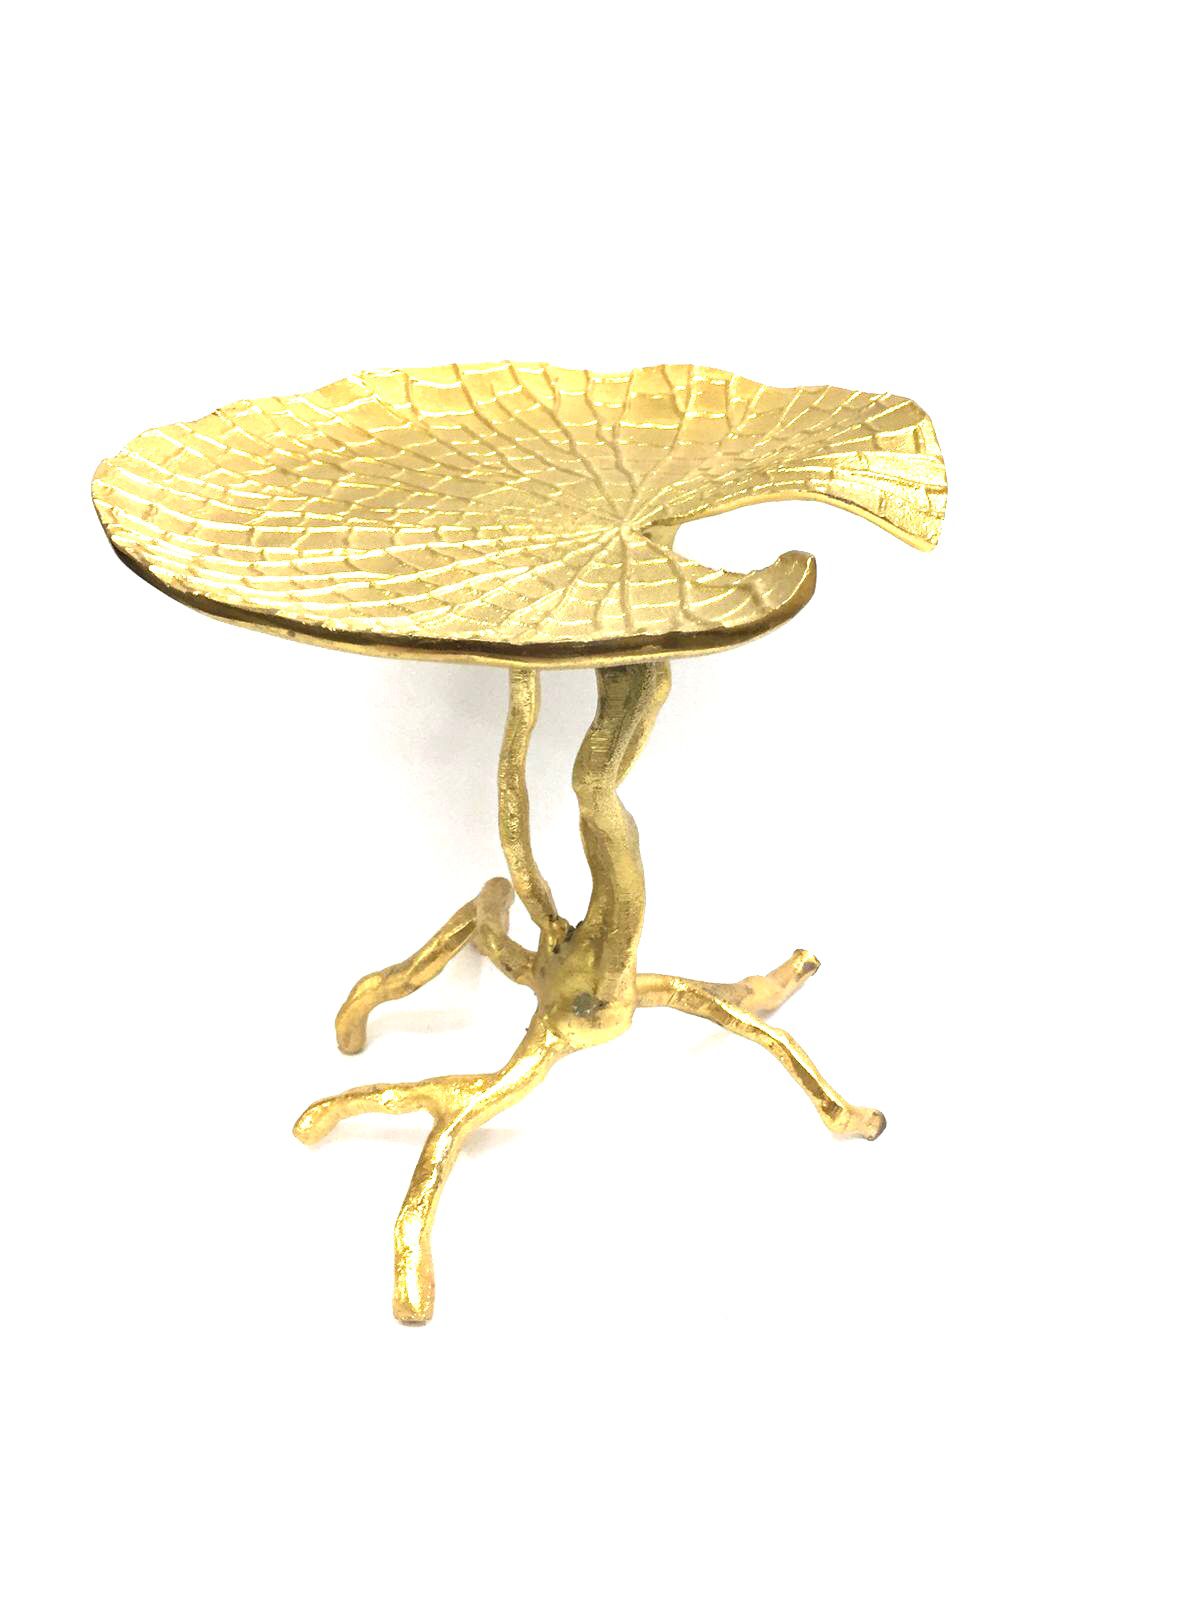 Metal Leaf Theme Lotus On Stem Attractive Platters Gold Color From Tamrapatra